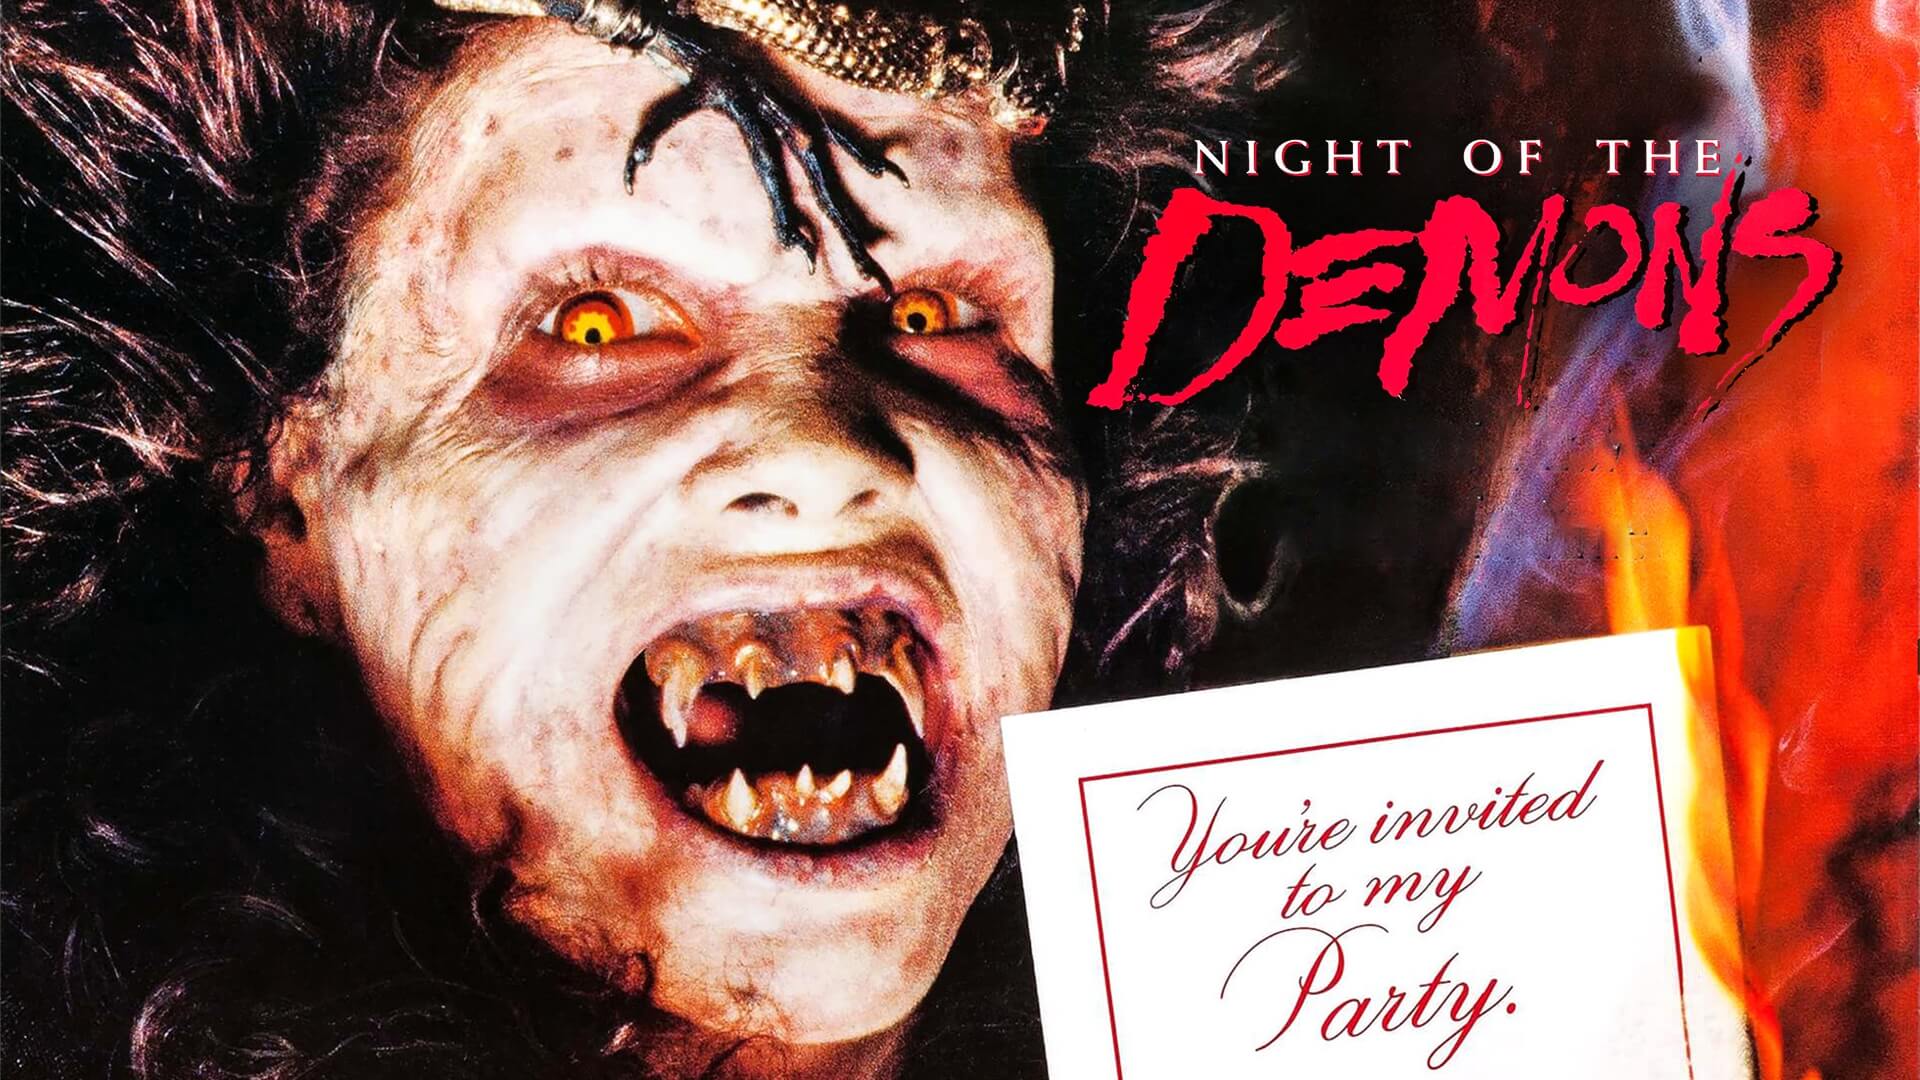 Night of the Demons (Νύχτες των δαιμόνων) Review